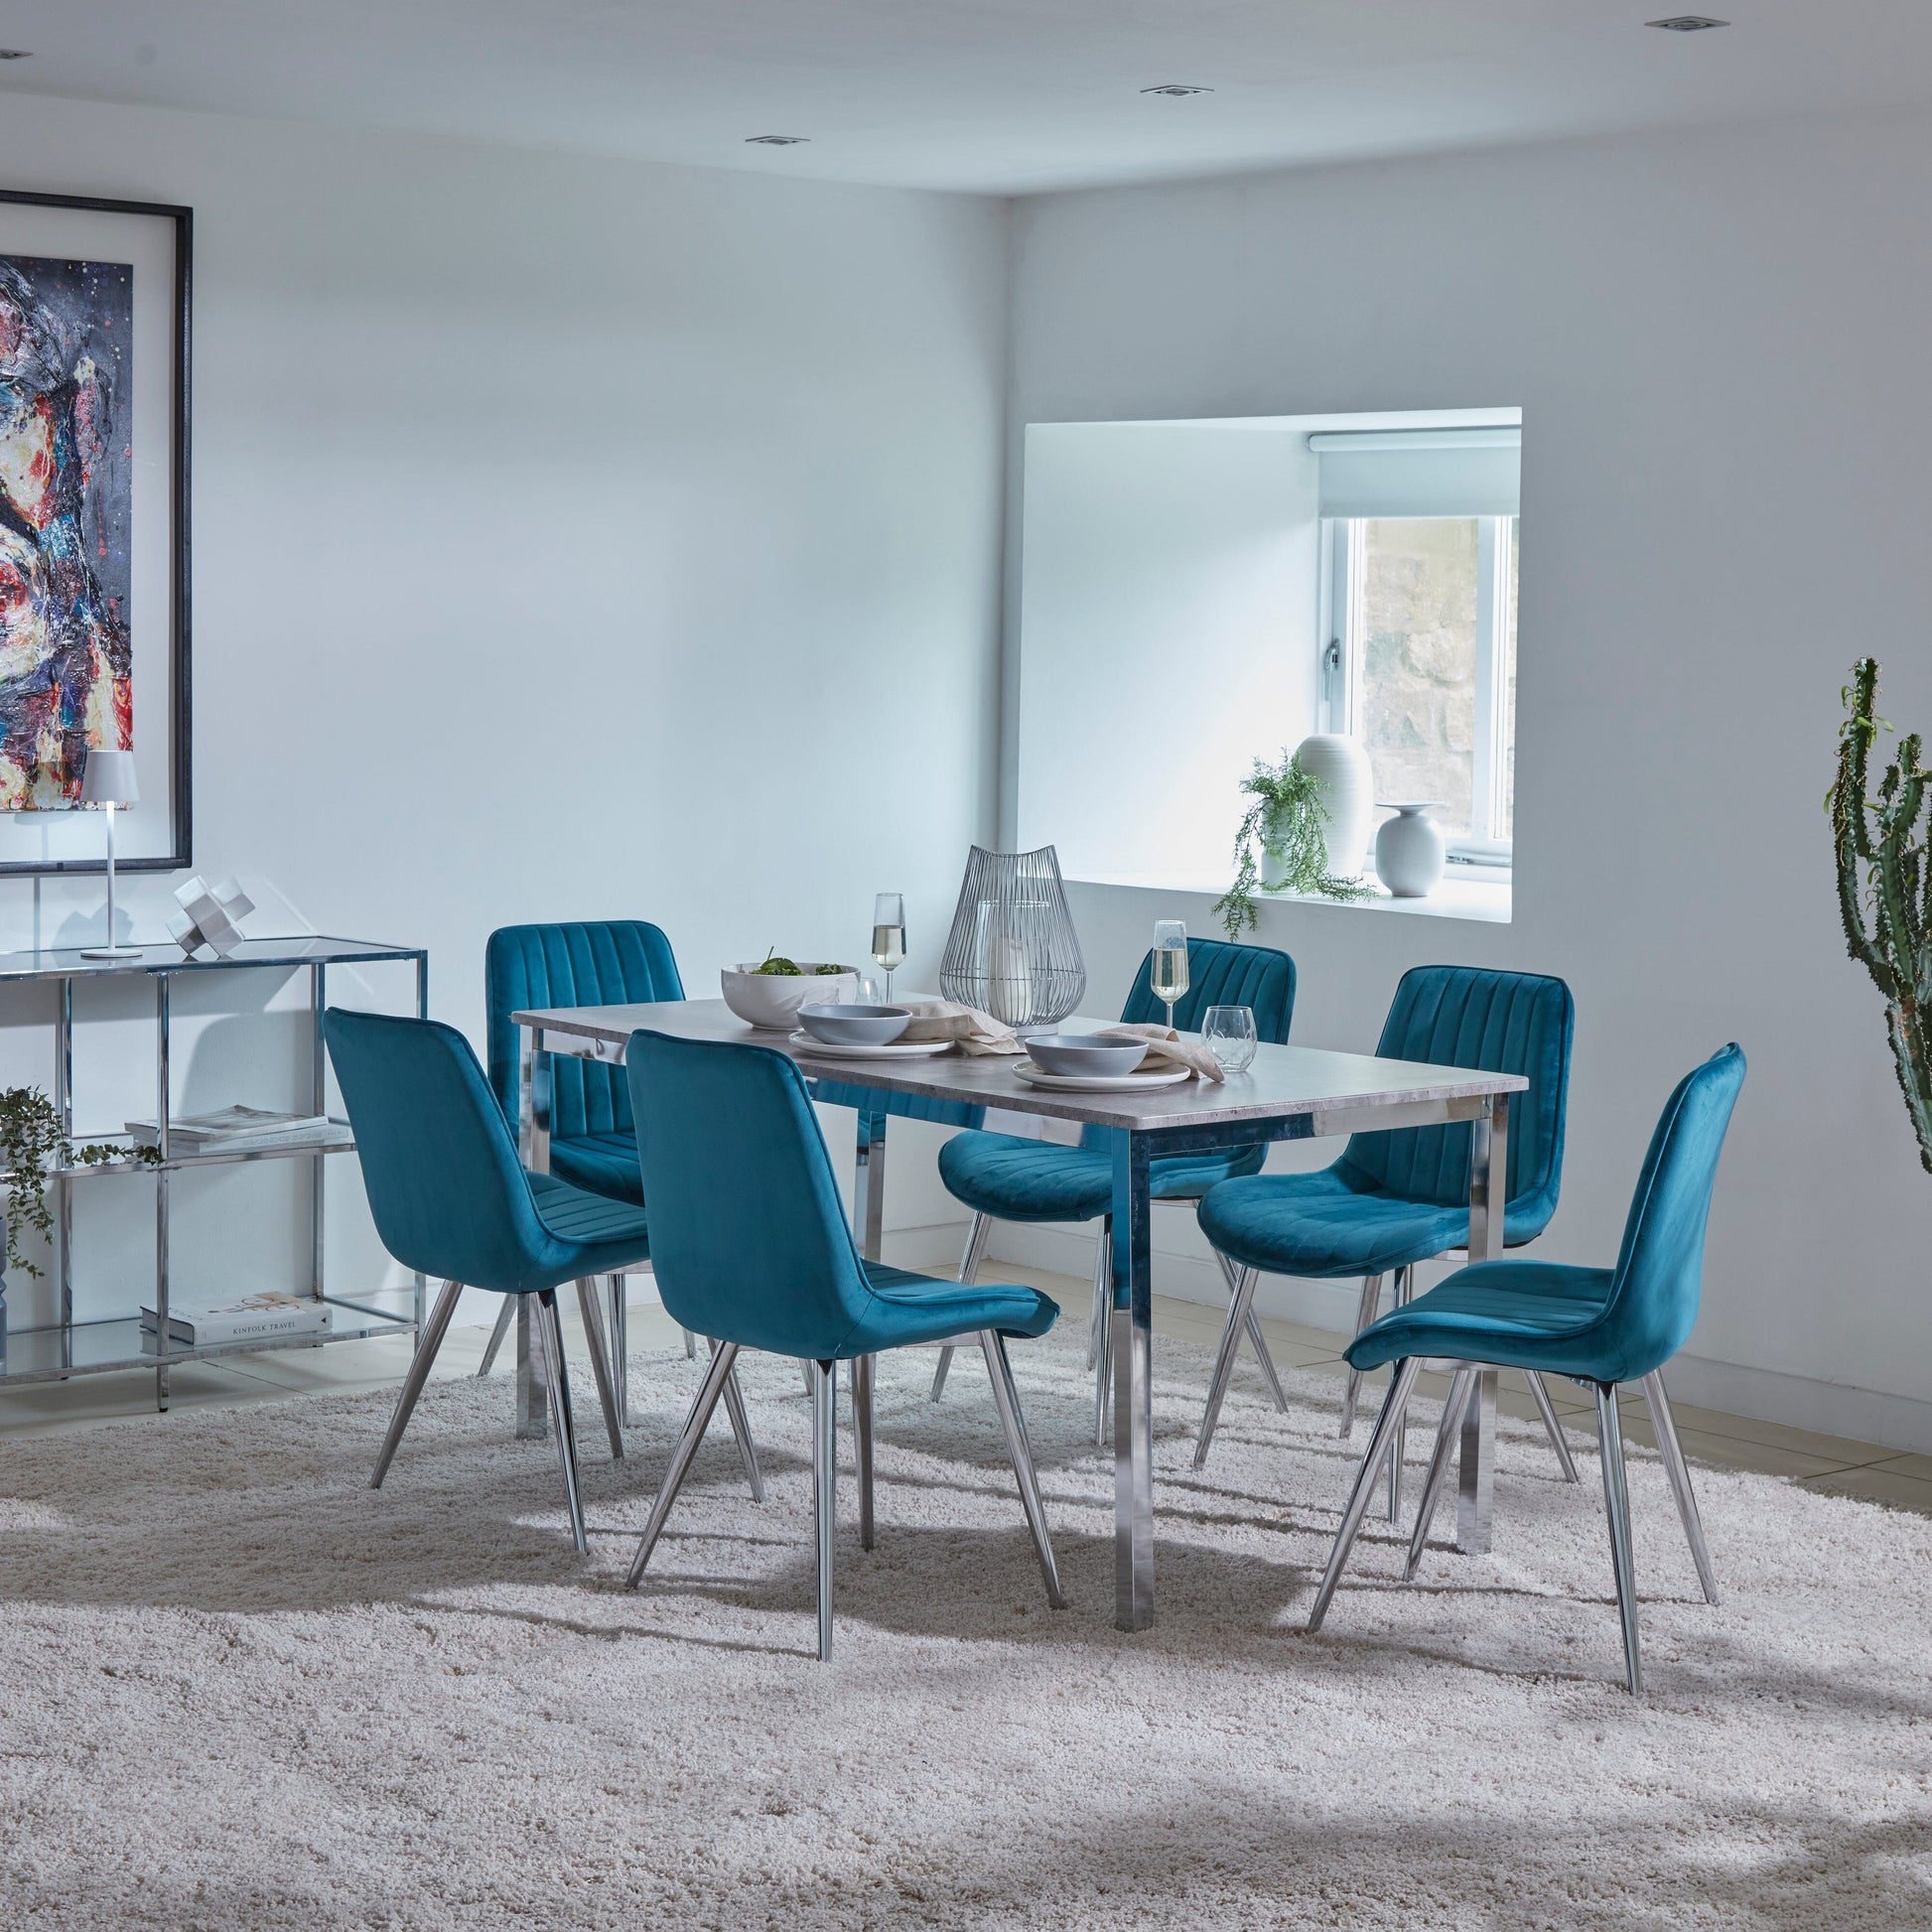 Milo Chrome Concrete Table effect Dining Table Set - 6 seater - Bella Teal and Chrome chairs set